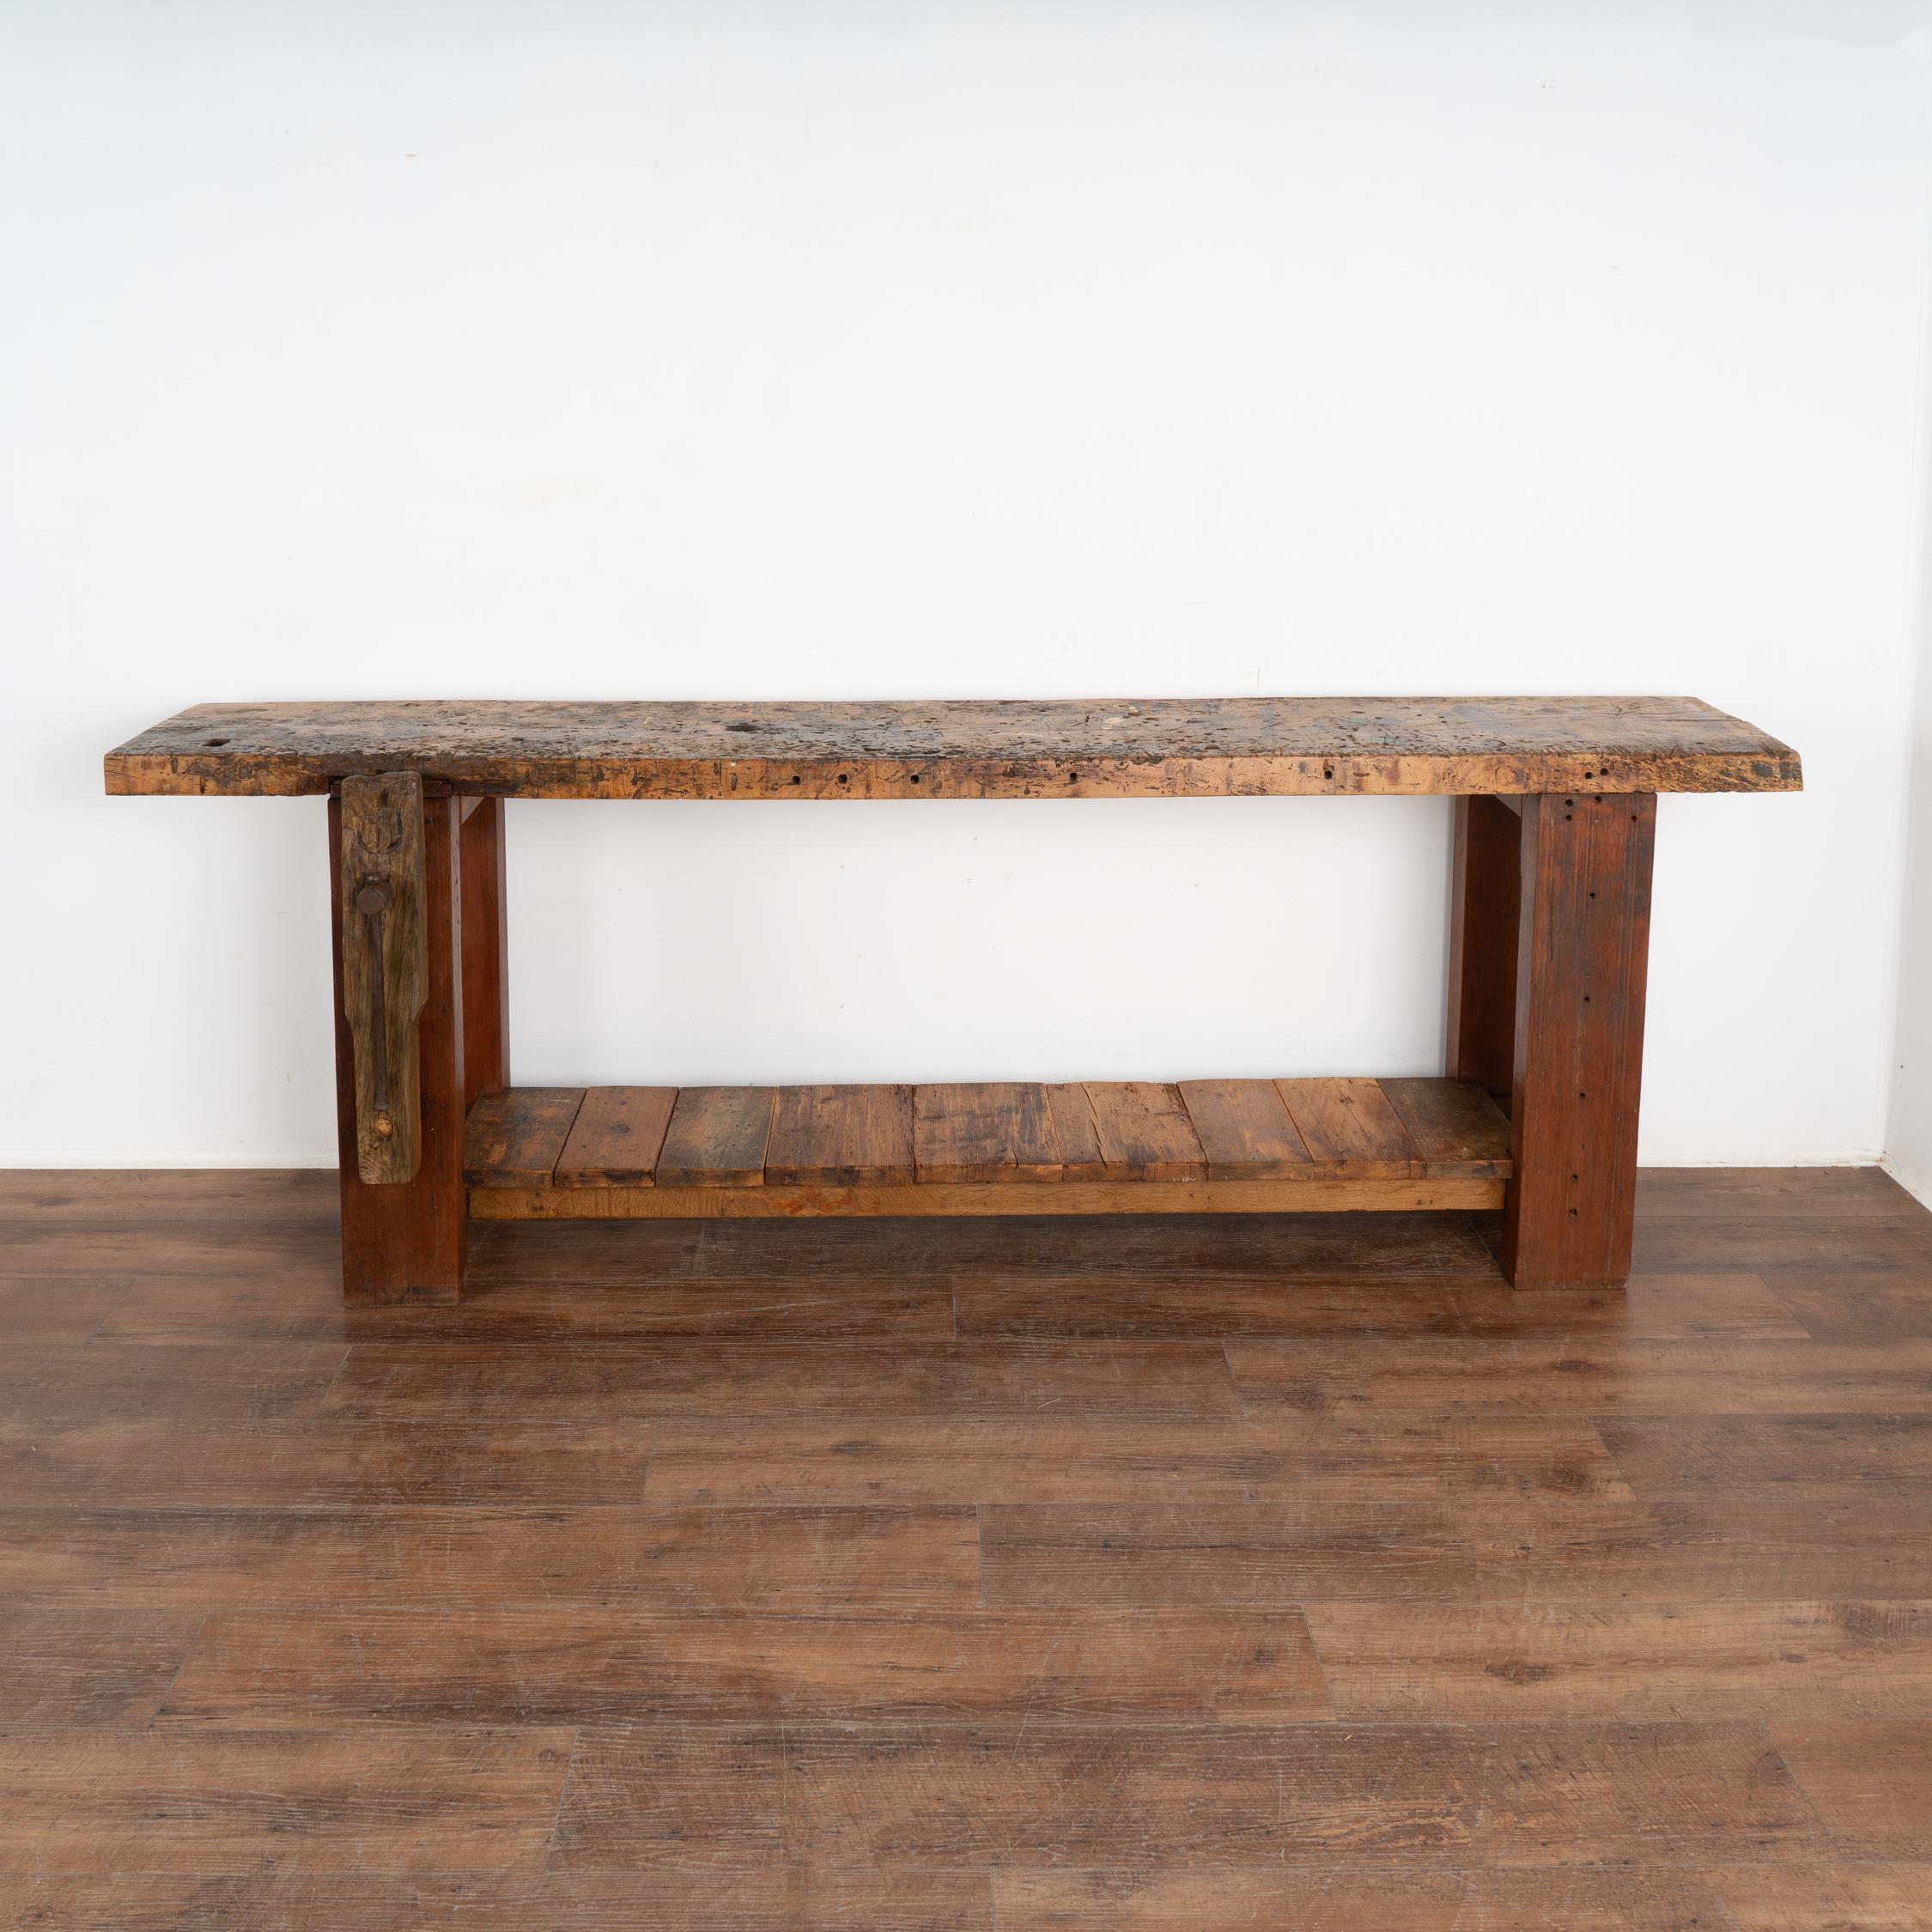 French  Rustic Console Table With Shelf, Carpenter's Workbench from France circa 1880